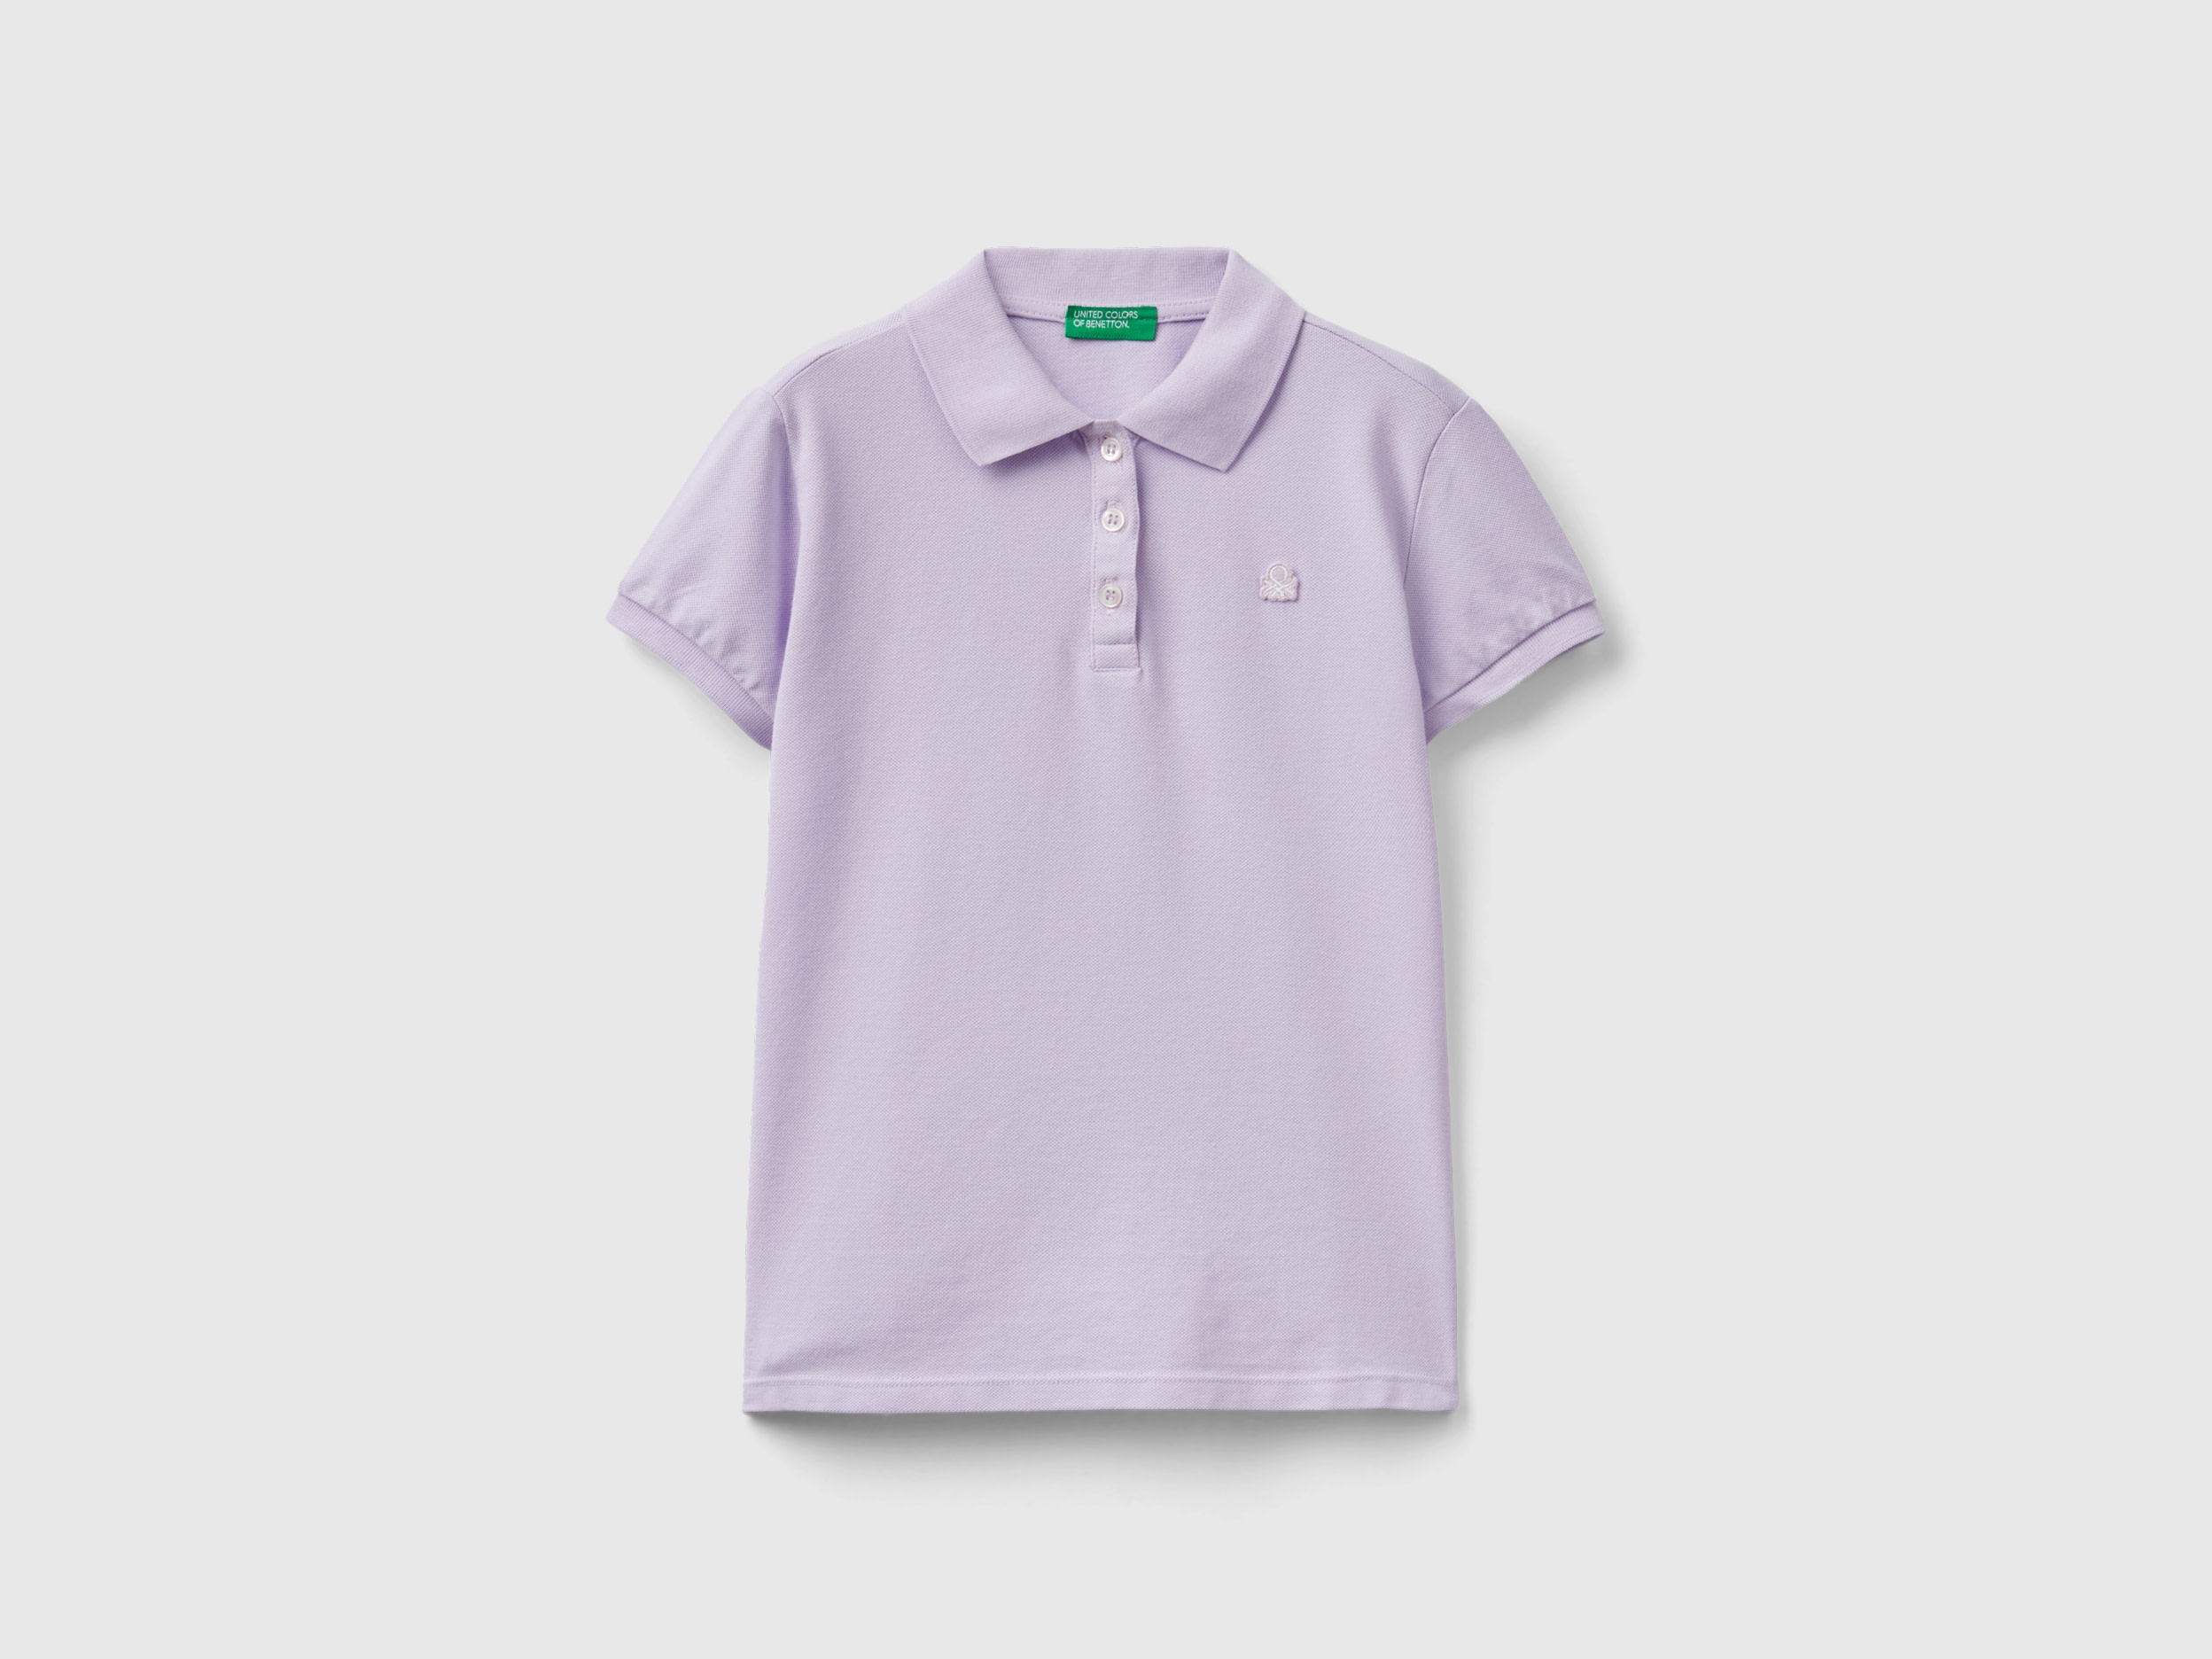 Image of Benetton, Short Sleeve Polo In Organic Cotton, size XL, Lilac, Kids